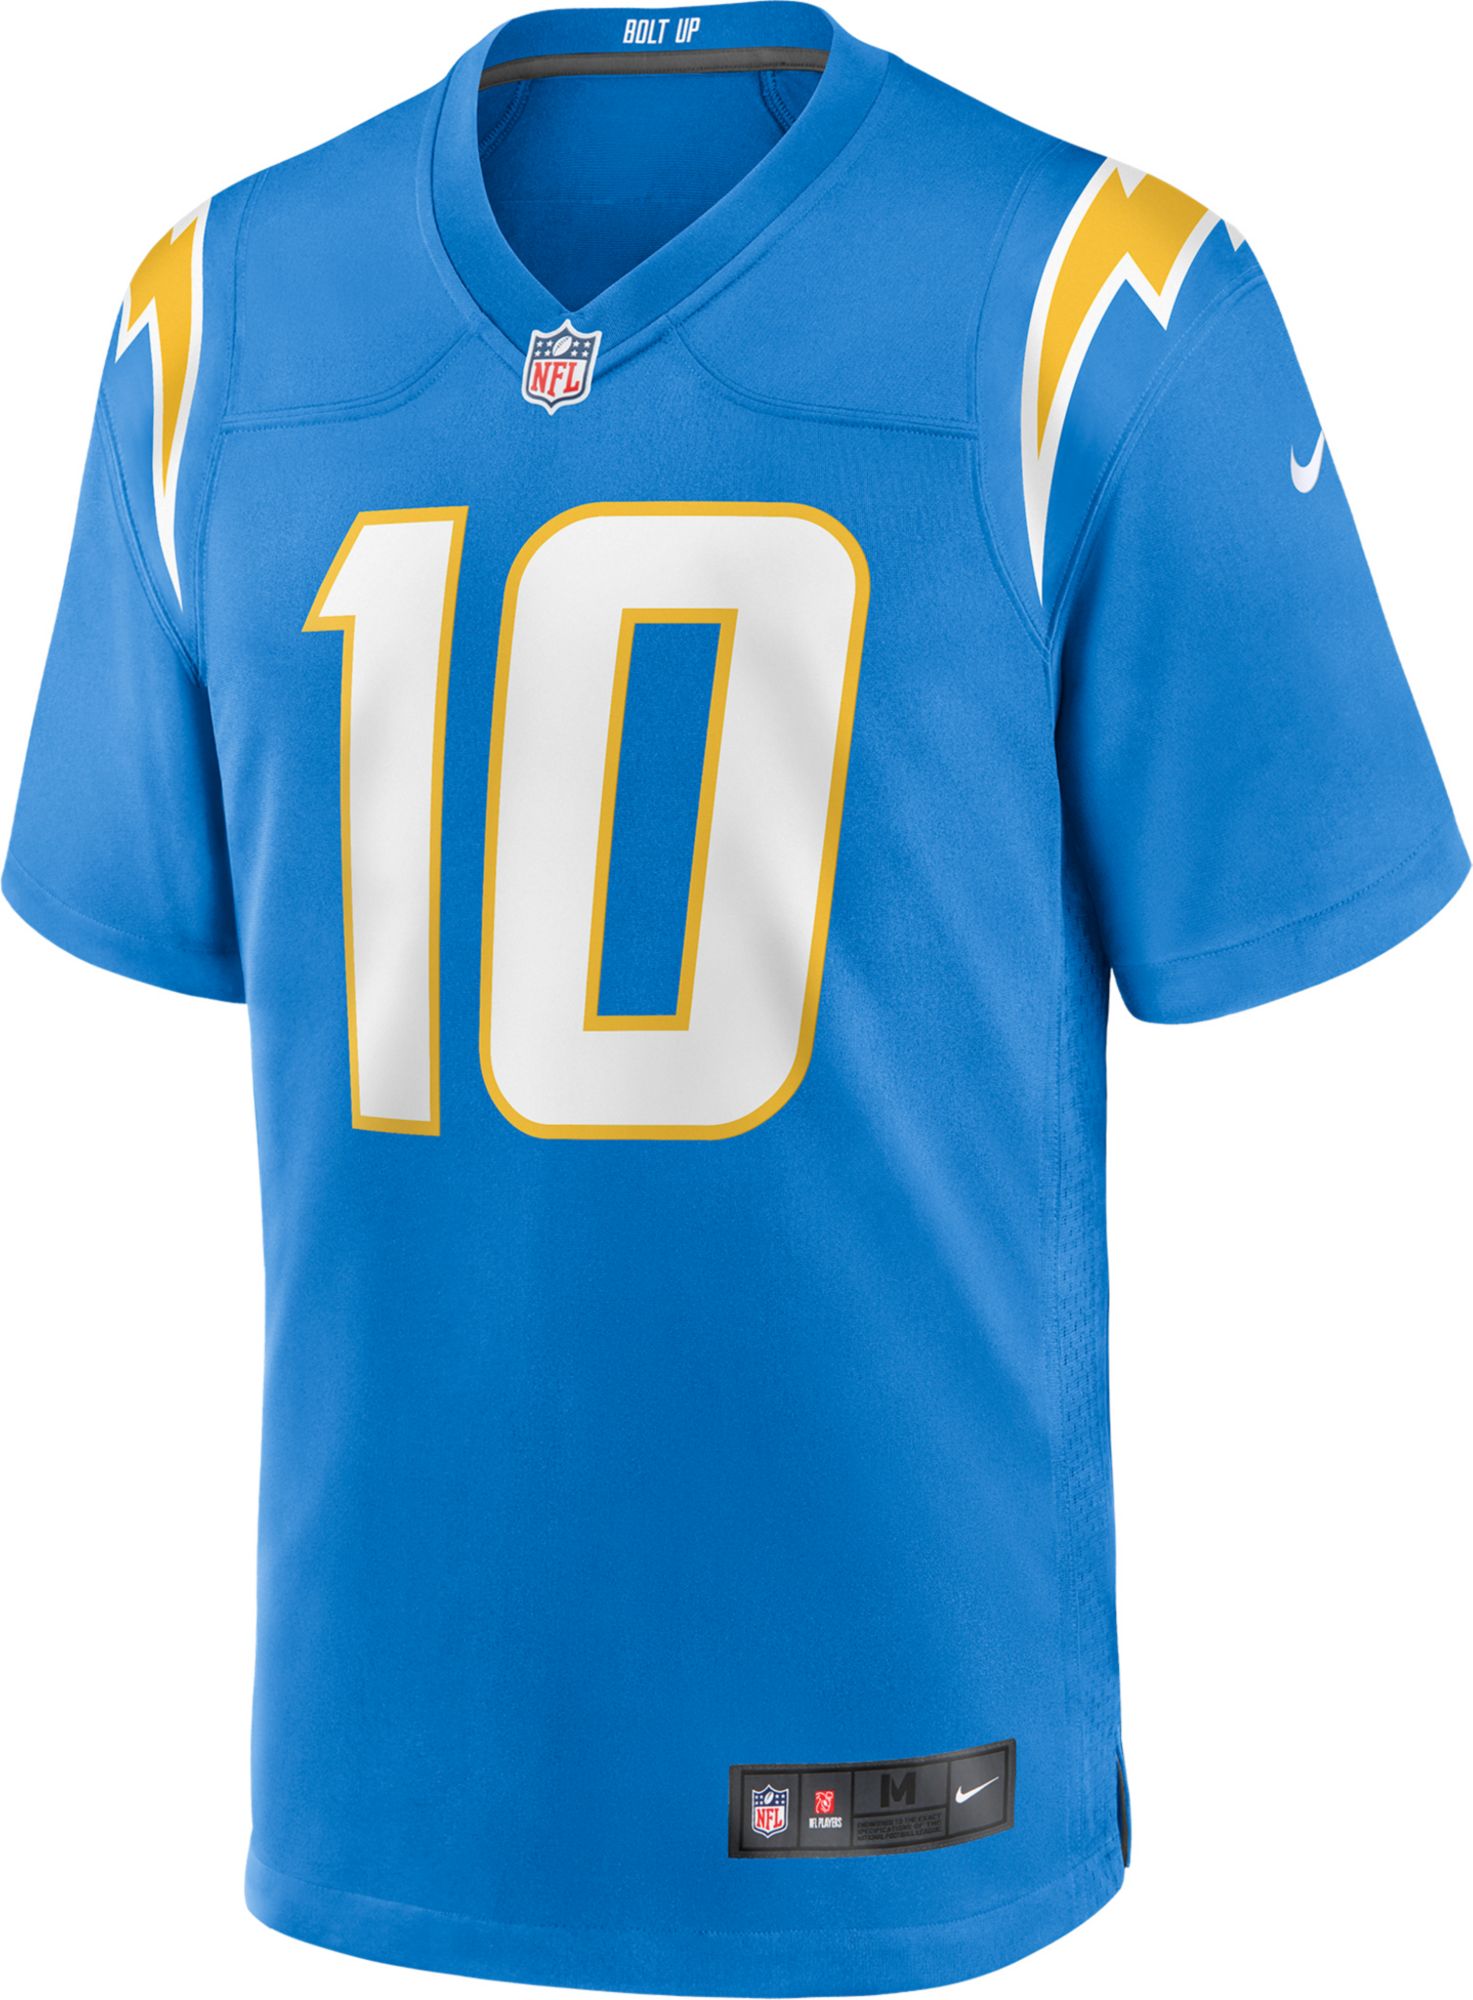 chargers jersey for kids